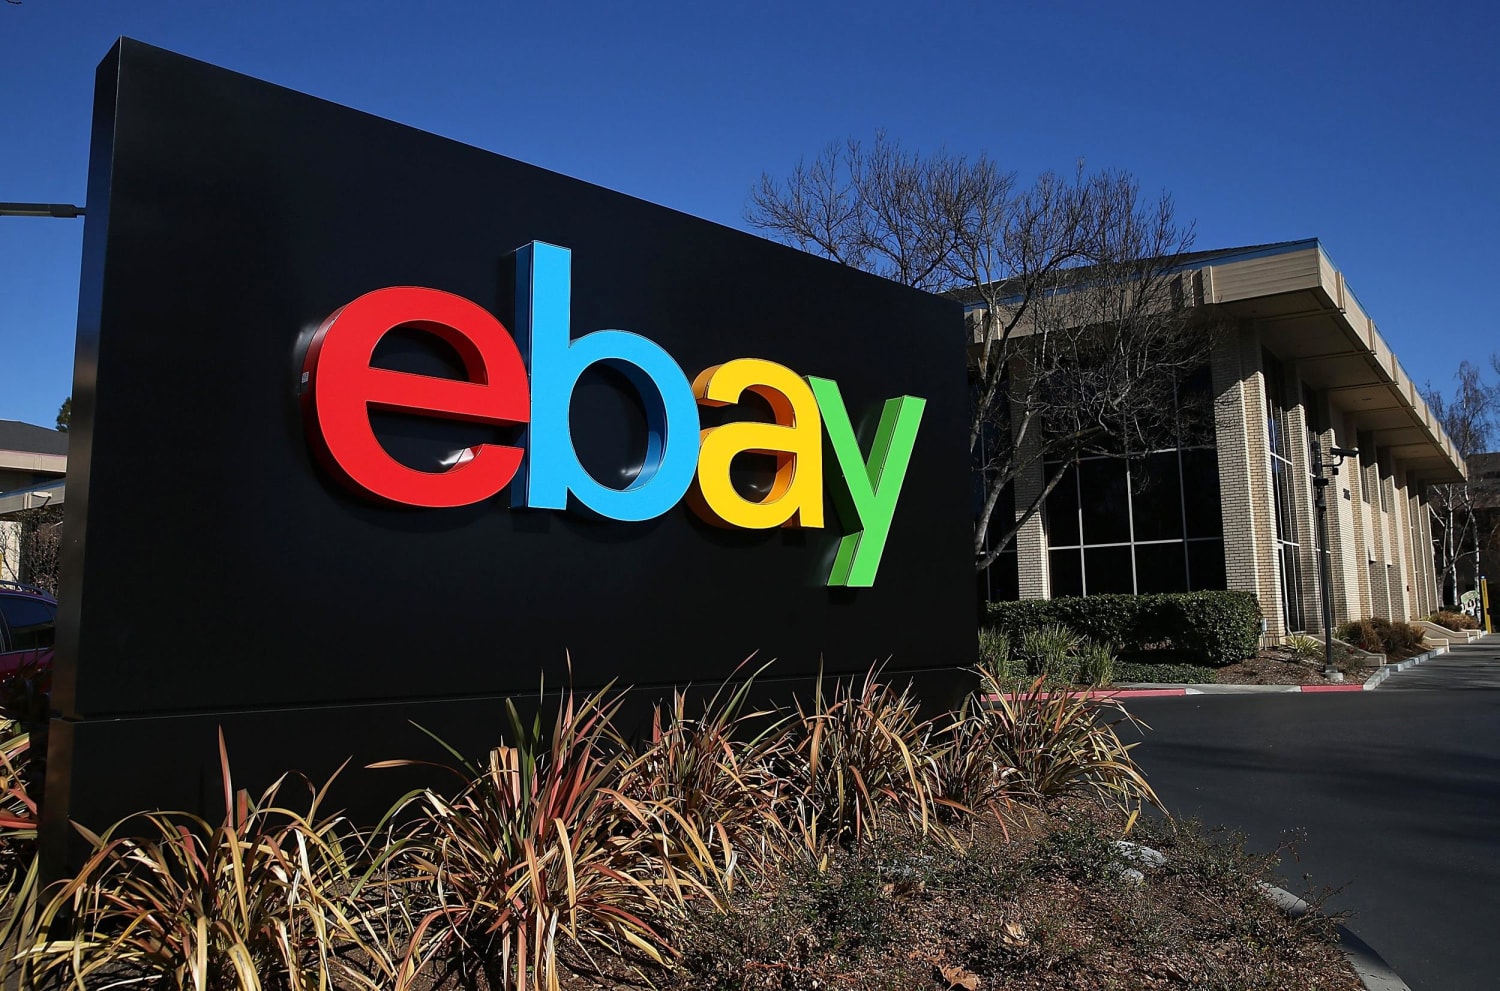 100k traffic for Ebay, Amazon Store Rankings, Sales and 